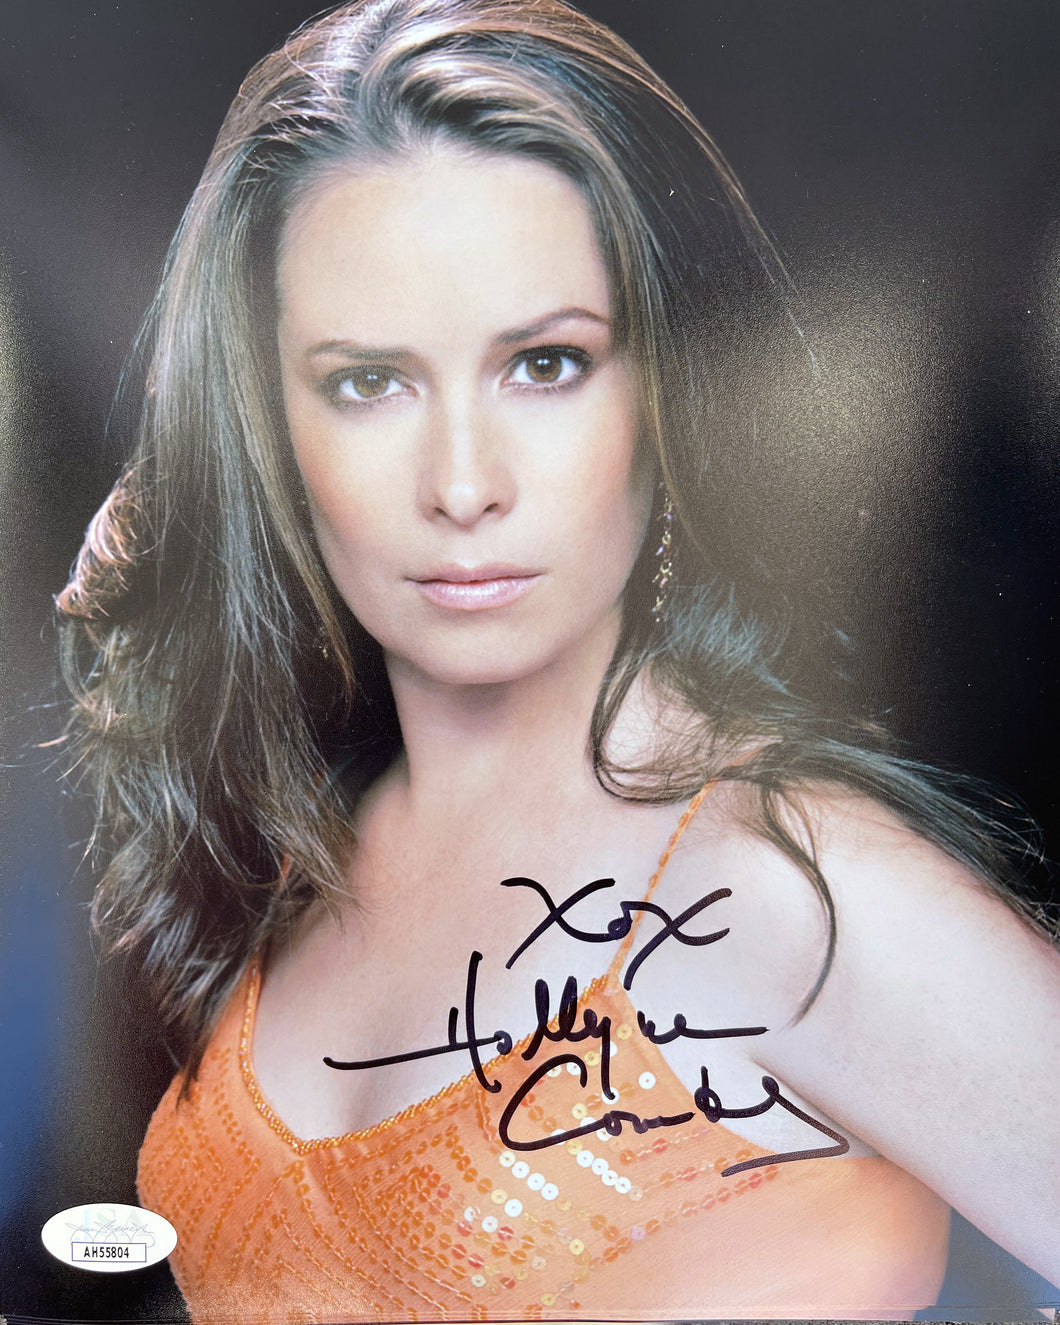 Holly Marie Combs signed 8x10 photo JSA Charmed